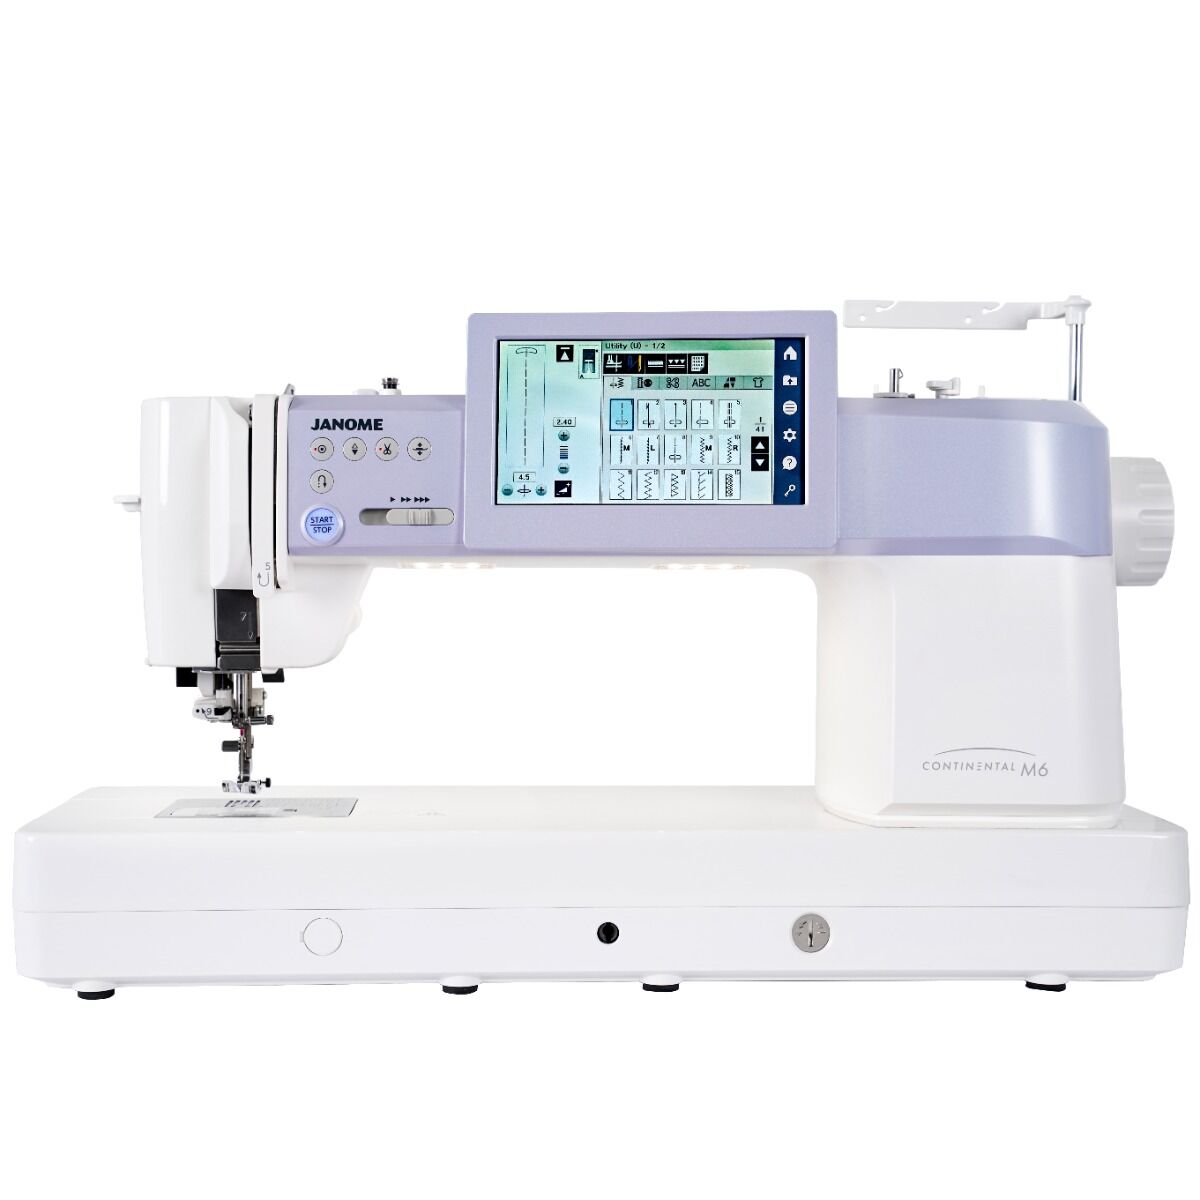 Janome Continental M6 Quilting & Sewing Machine,Janome Continental M6 Quilting & Sewing Machine Side,Janome Continental M6 Quilting & Sewing Machine Side